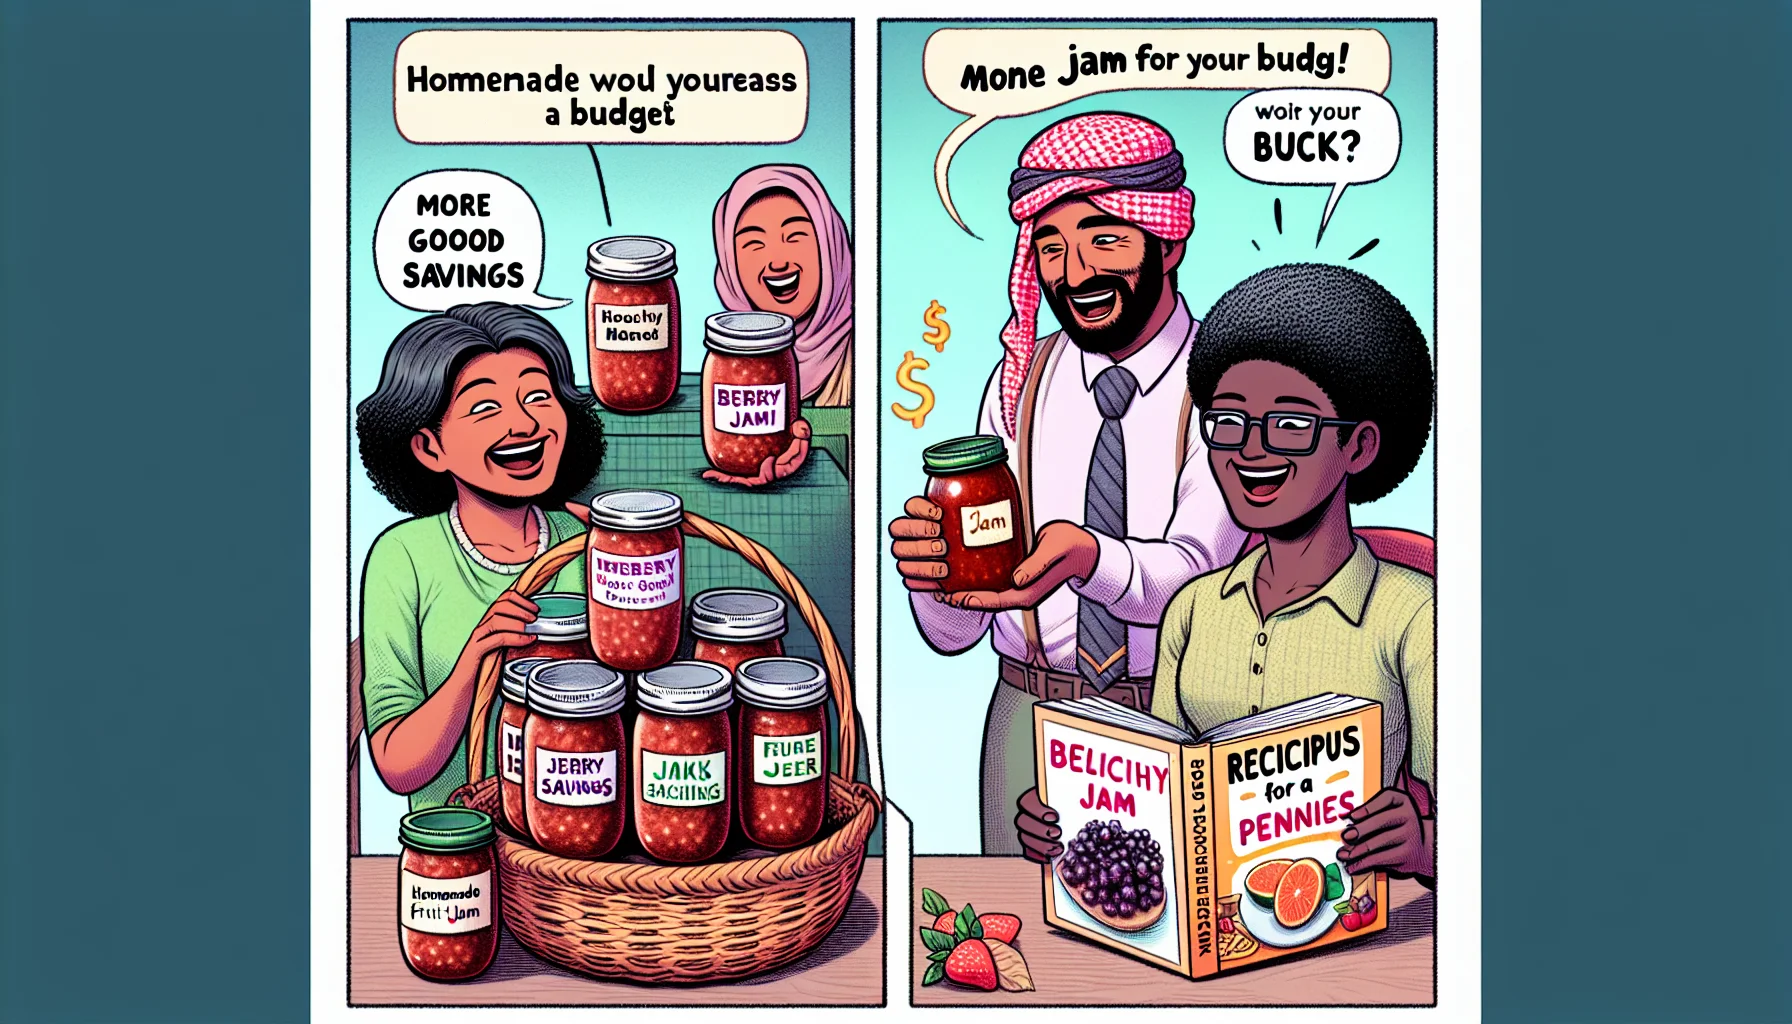 Depict a humorous scene with three different homemade jam gift ideas that encourage healthy eating on a budget. The first scene should depict a South Asian woman presenting a basket filled with enticing jars of homemade fruit jam, cleverly labeled with pun-inspired names like 'Berry Good Savings'. In the second scenario, create a Middle-Eastern man comically comparing the small size of a store-bought jam jar to a large, homemade jam-filled mason jar, with a tagline saying 'More Jam for your Buck!'. The final scene should be a Black woman joyously poring over a guidebook titled 'Delicious DIY: Jam Recipes for Pennies'.